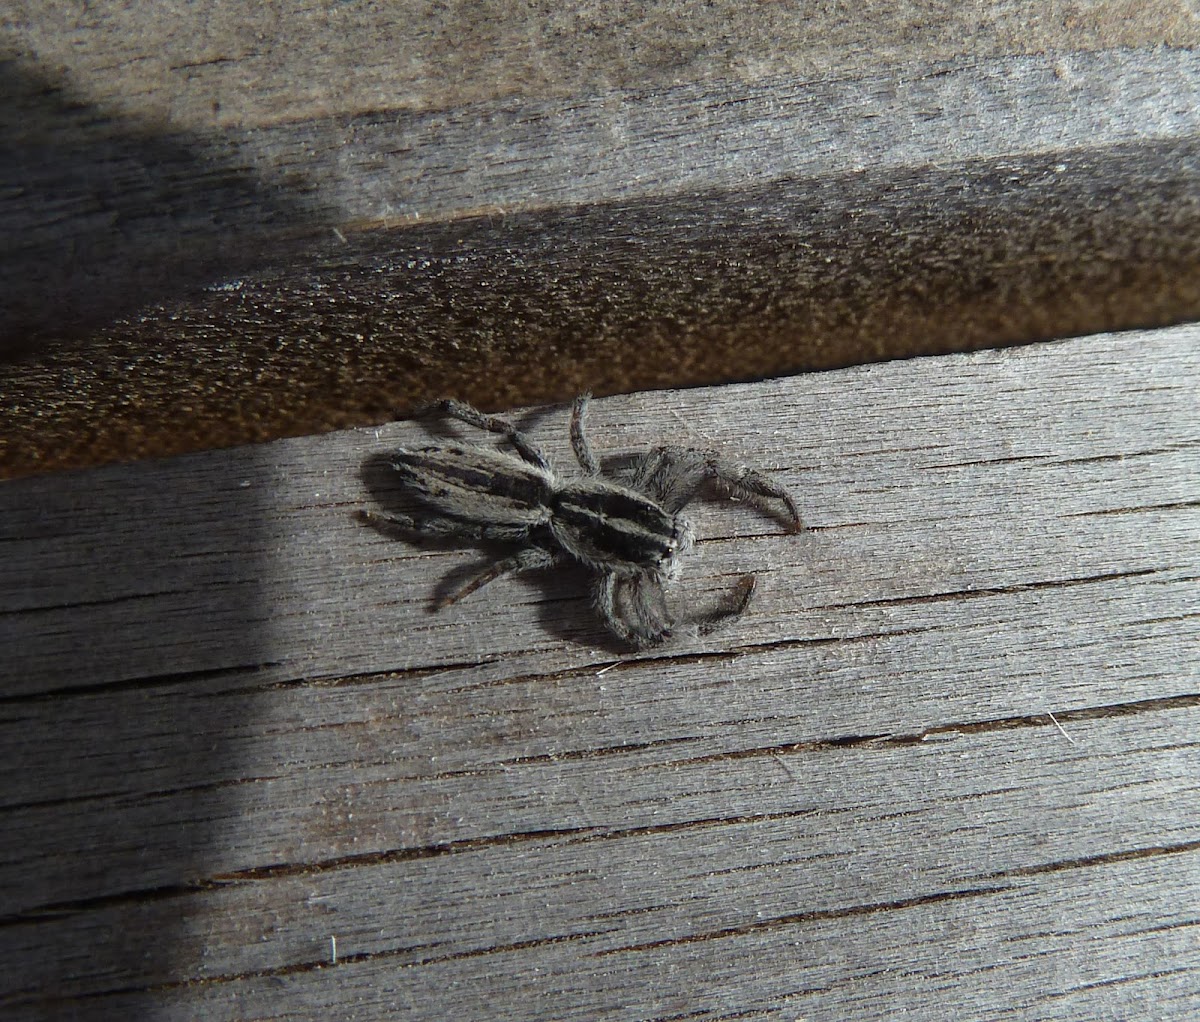 Flat jumping spider